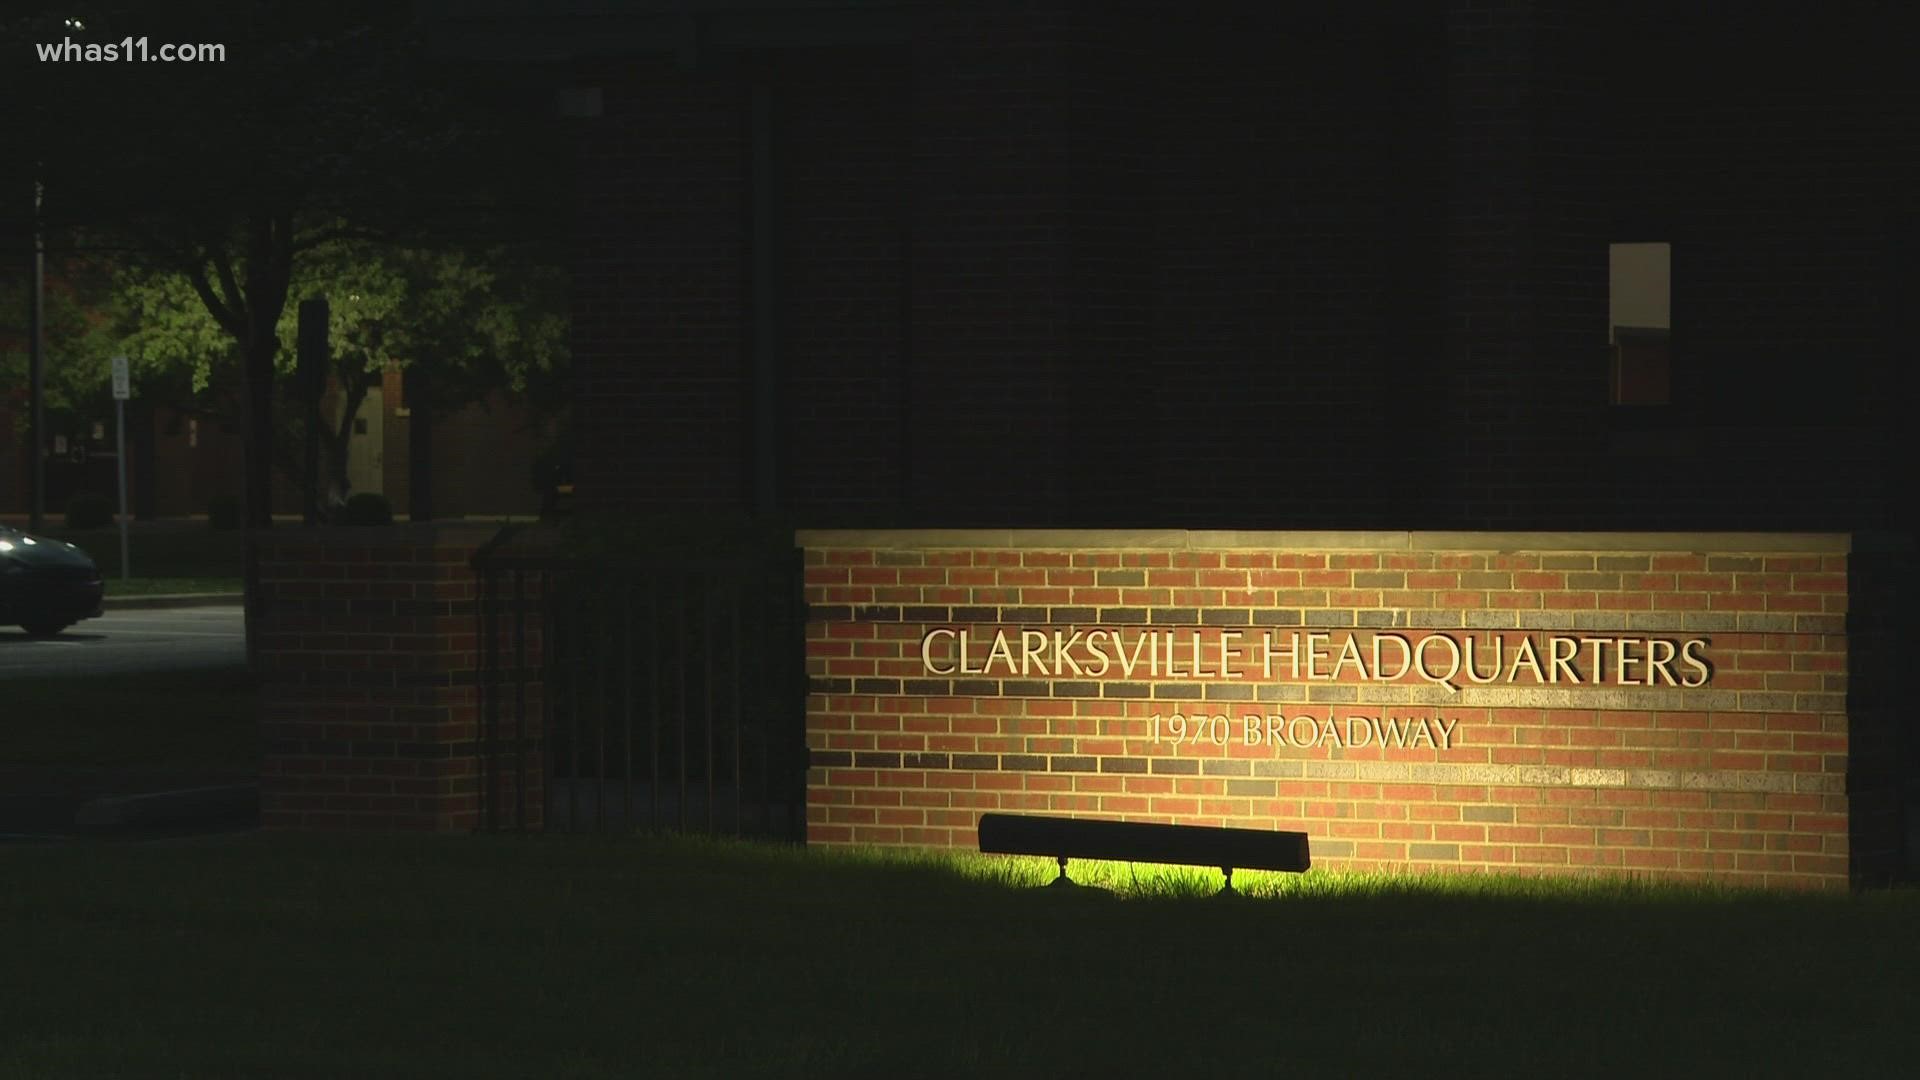 The Department of Justice is suing the town of Clarksville, accusing them of discriminating against a man with HIV.